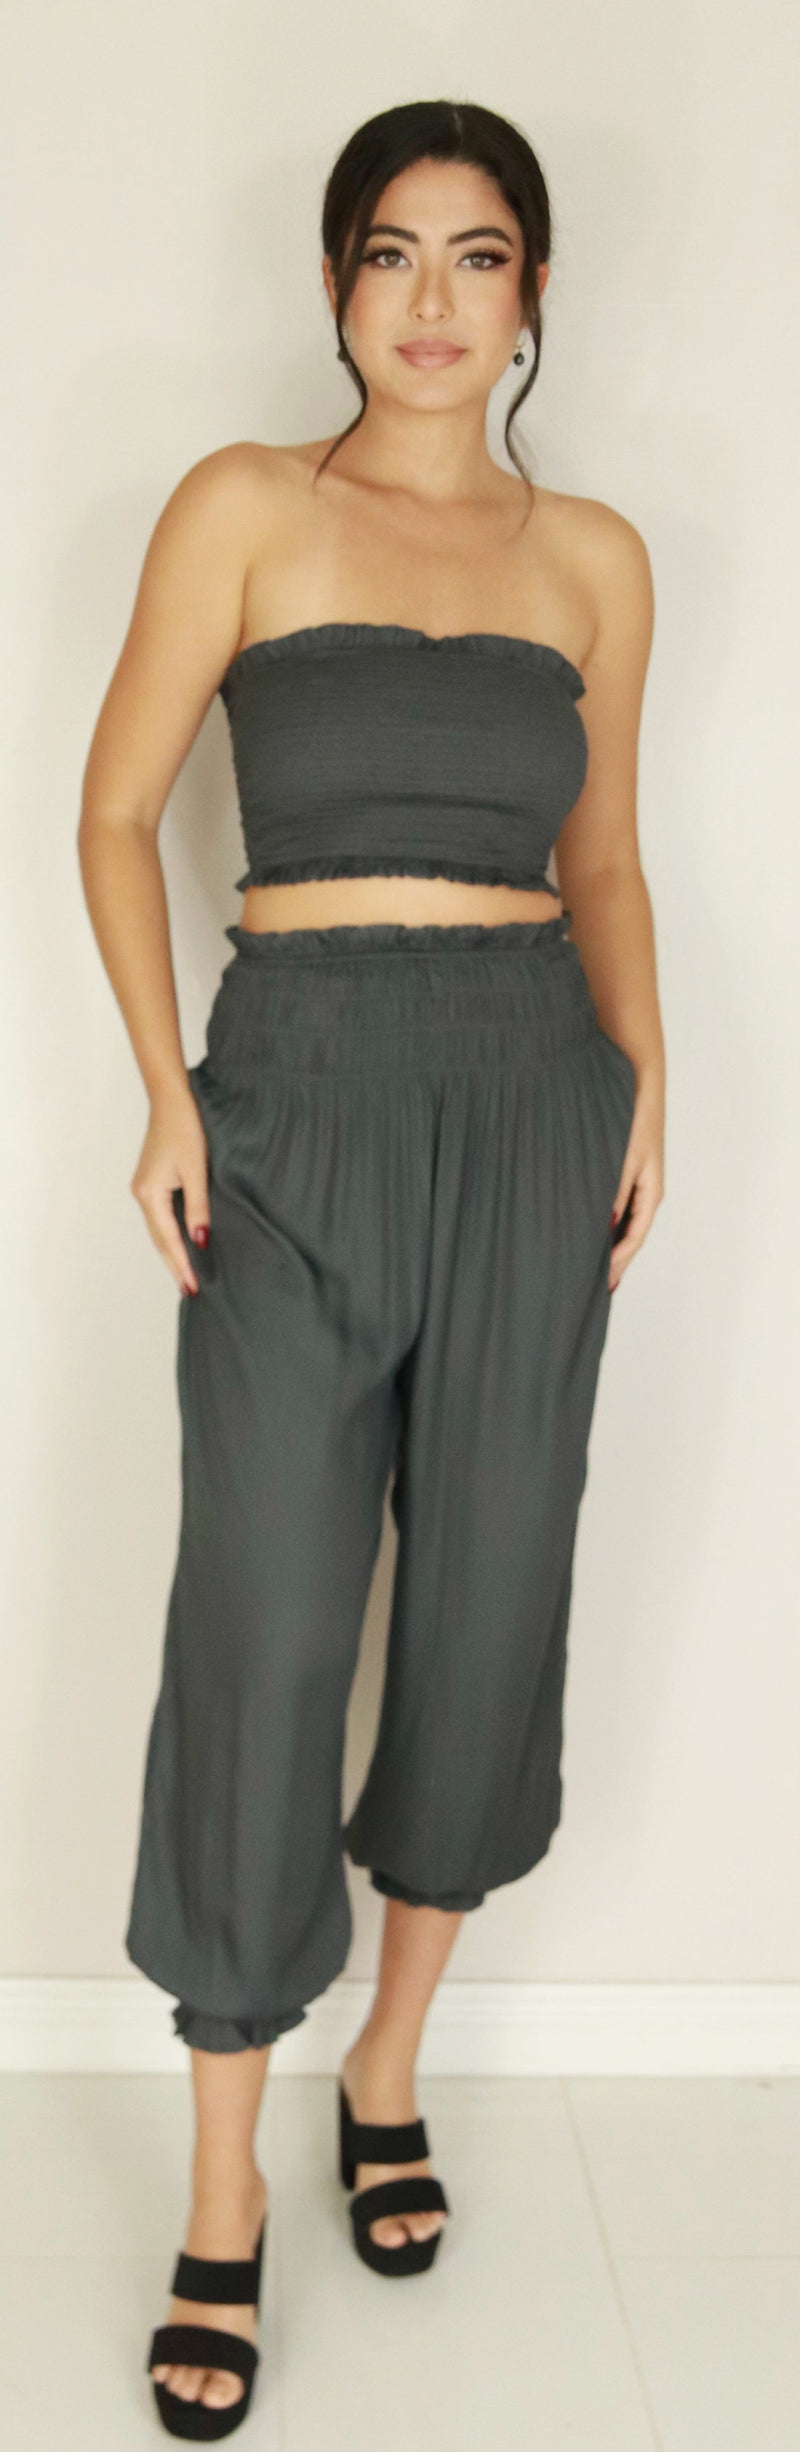 Jeans Warehouse Hawaii - SOLID WOVEN PANTS - SMOCKED WAIST JOGGER | By MIOU MUSE